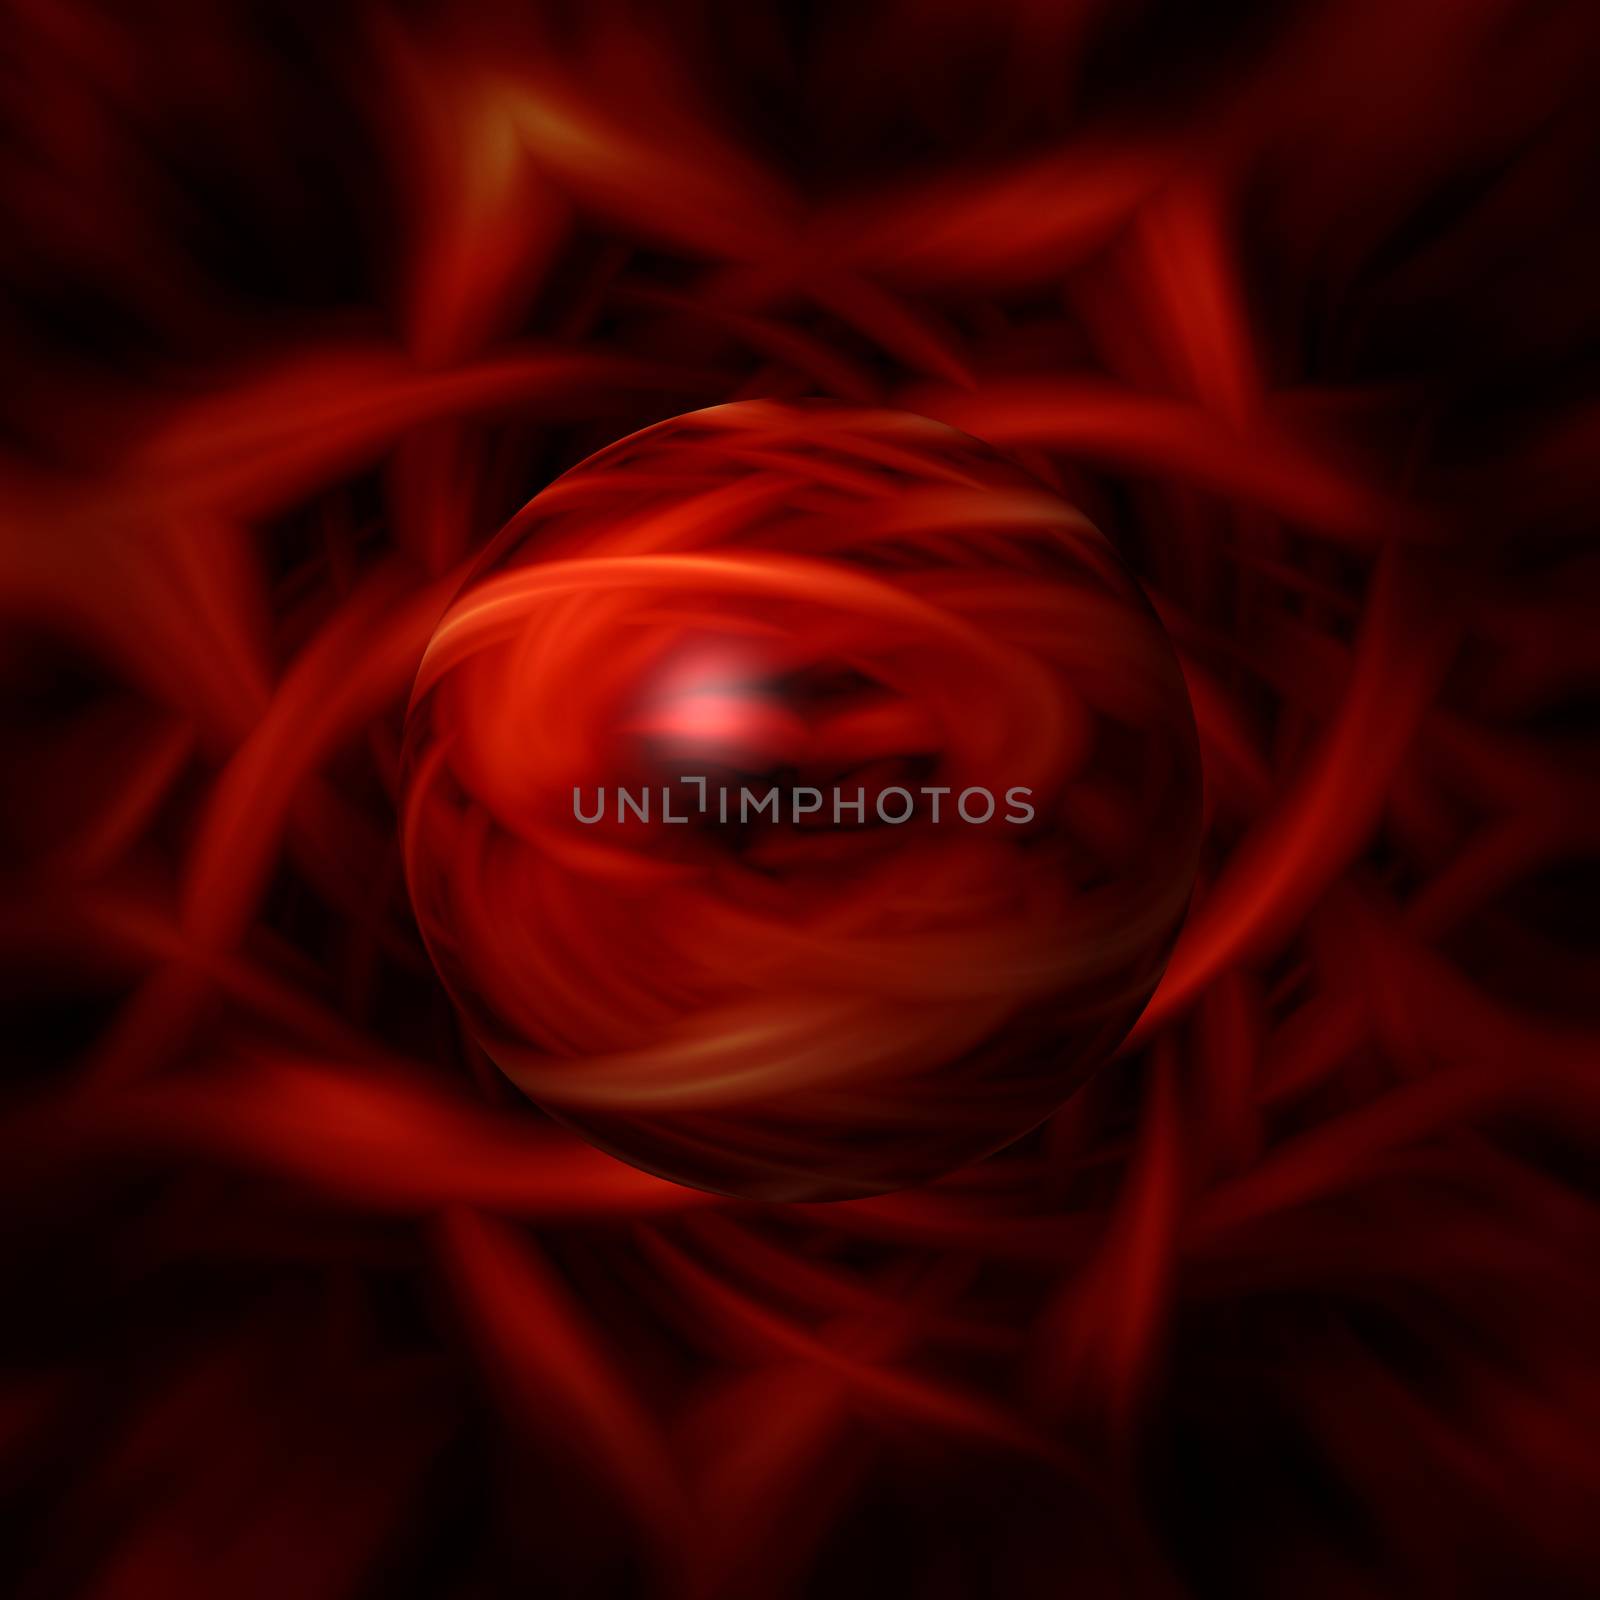 Red sphere with a dark blurred backgrond